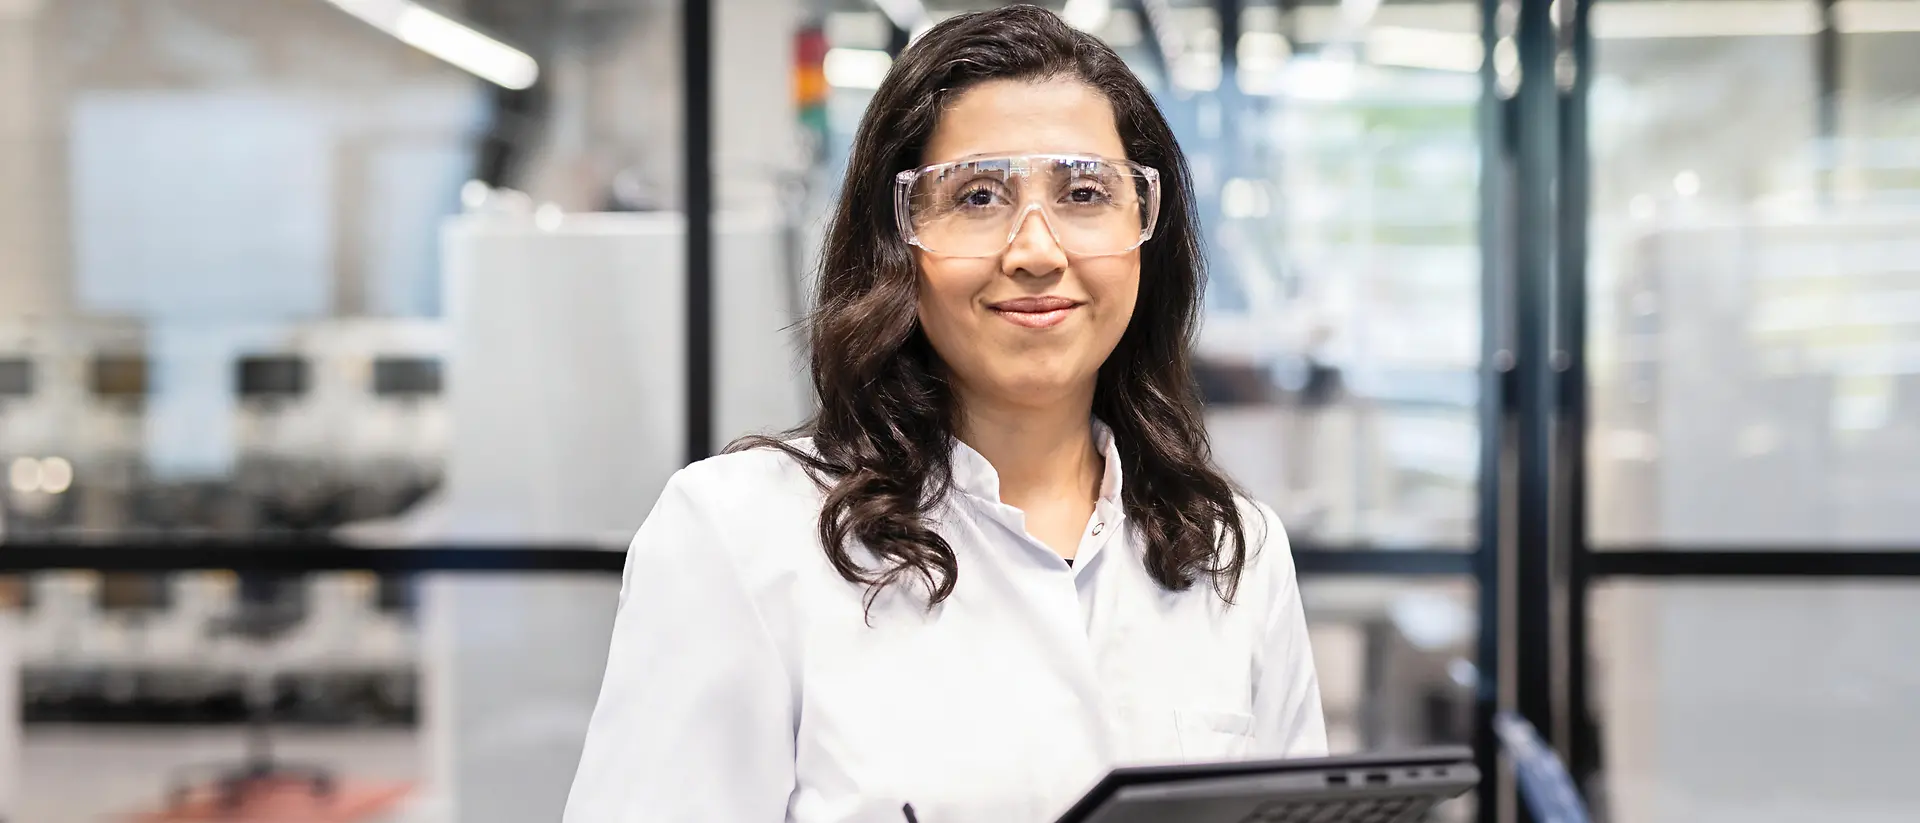 A female lab technician wearing a white coat and safety glasses and holding a tablet. She is loooking towards the camera and smiling.